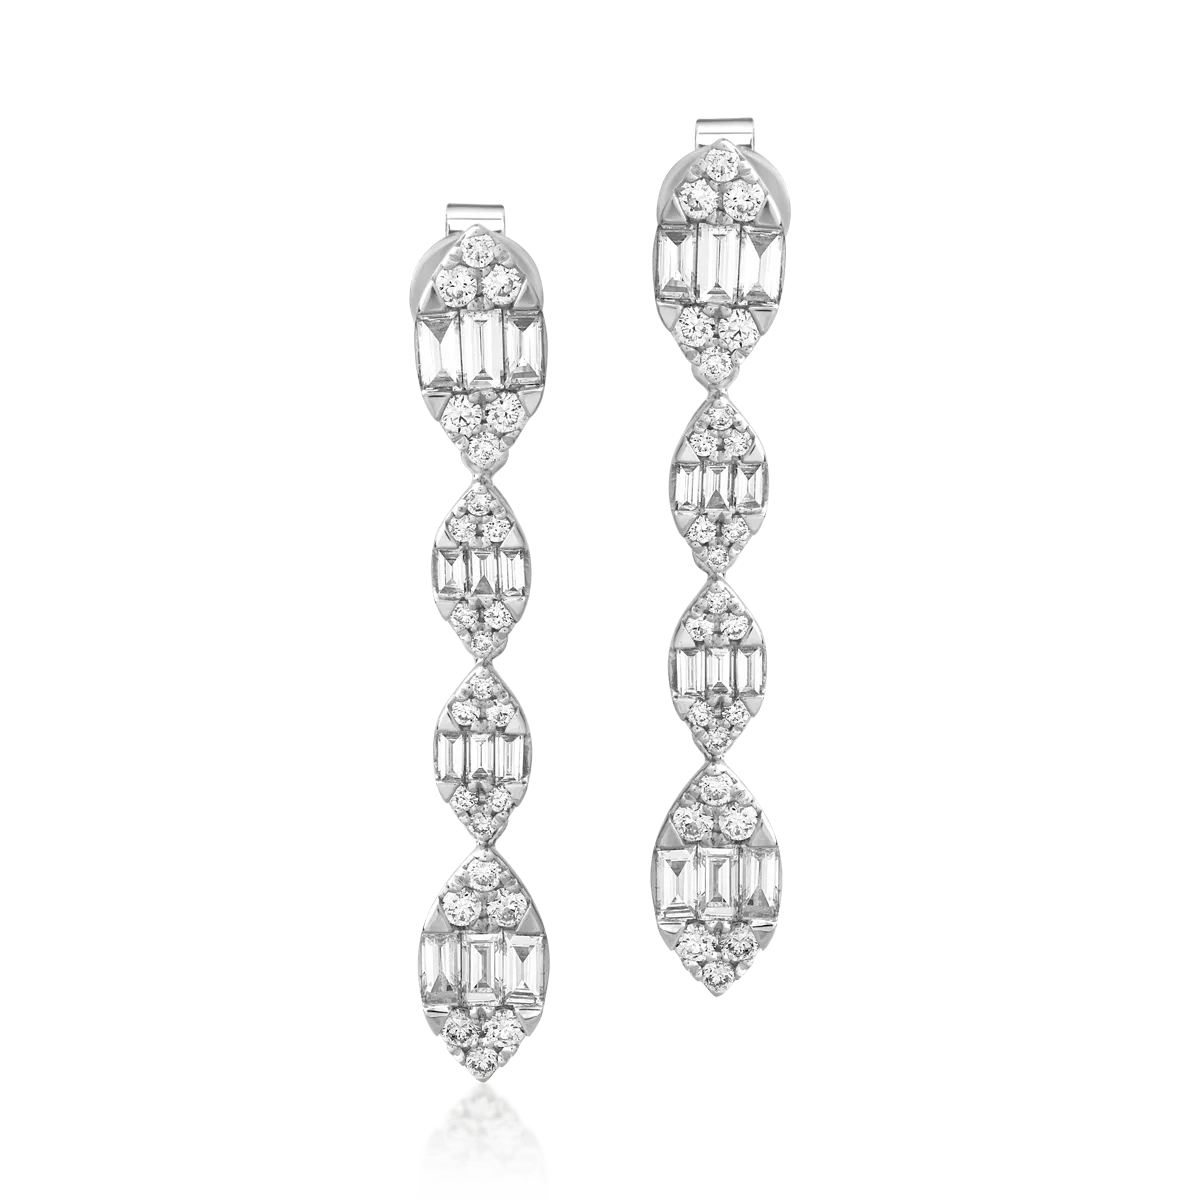 18K white gold earrings with 1.45ct diamonds